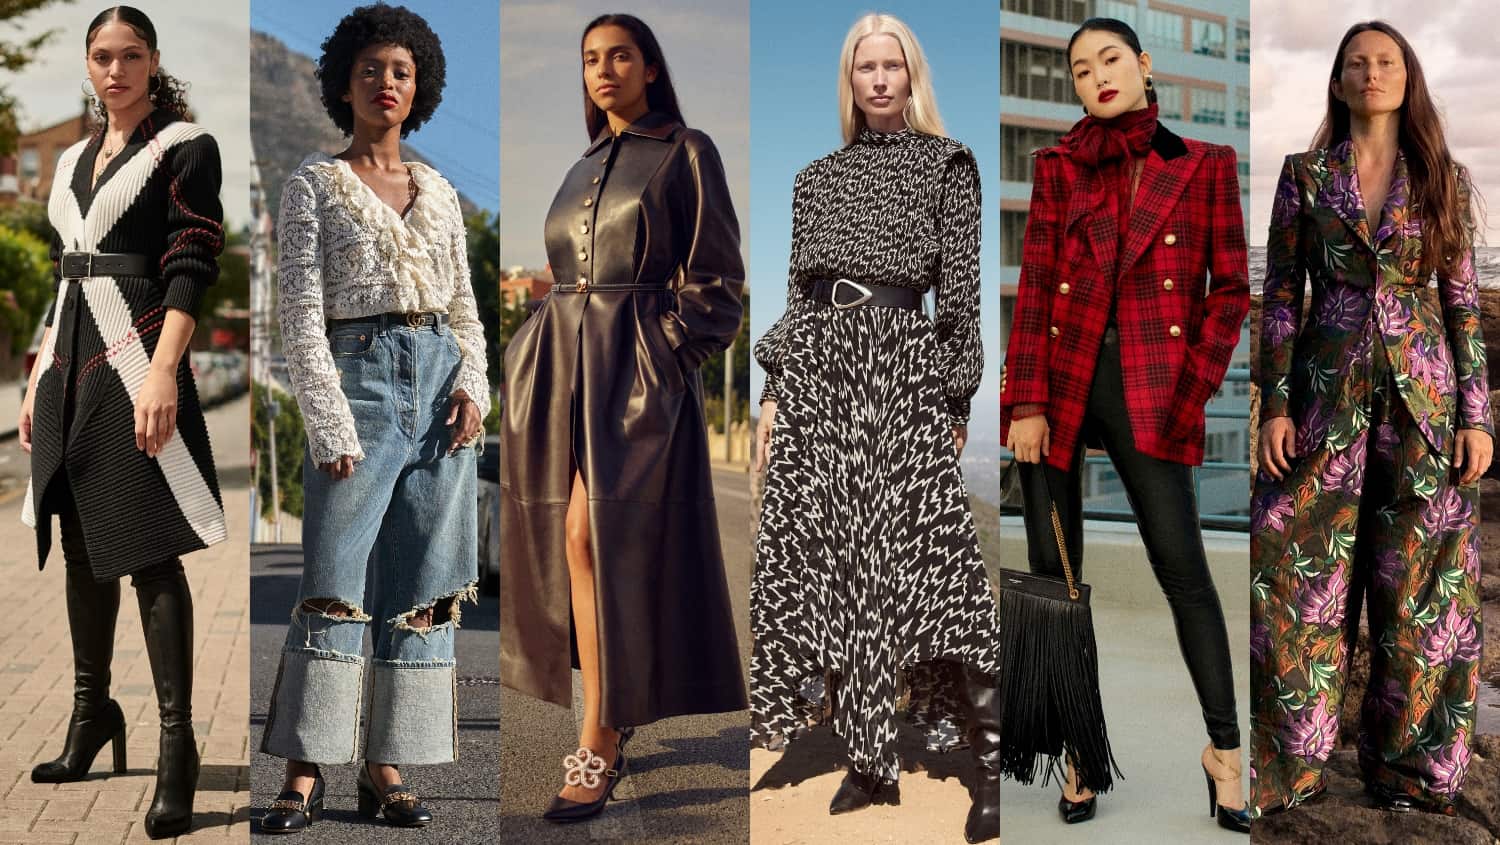 Net-a-Porter's Fall Campaign Shows Real ...